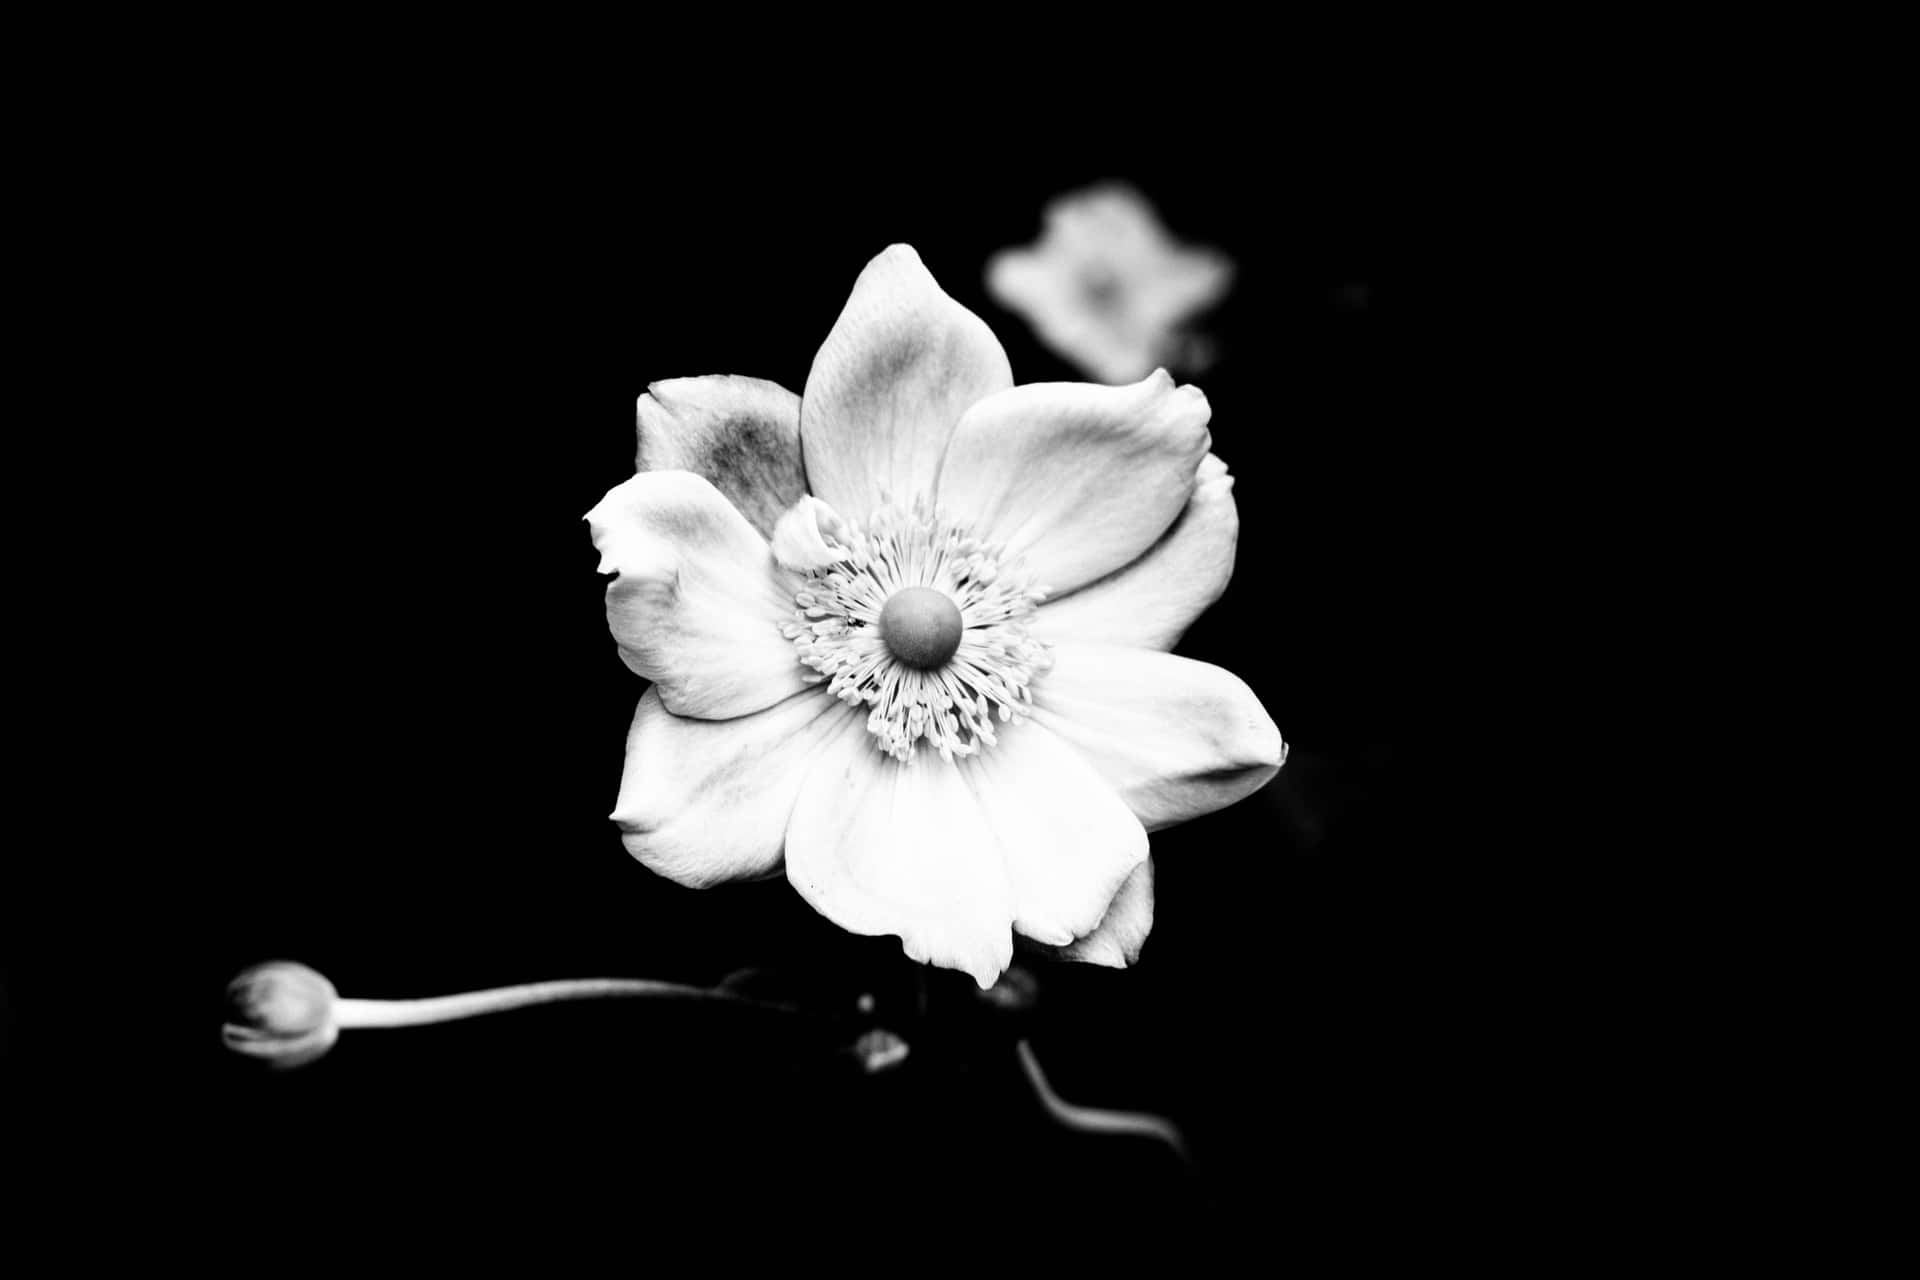 A black and white flower poses delicately against a blank background.